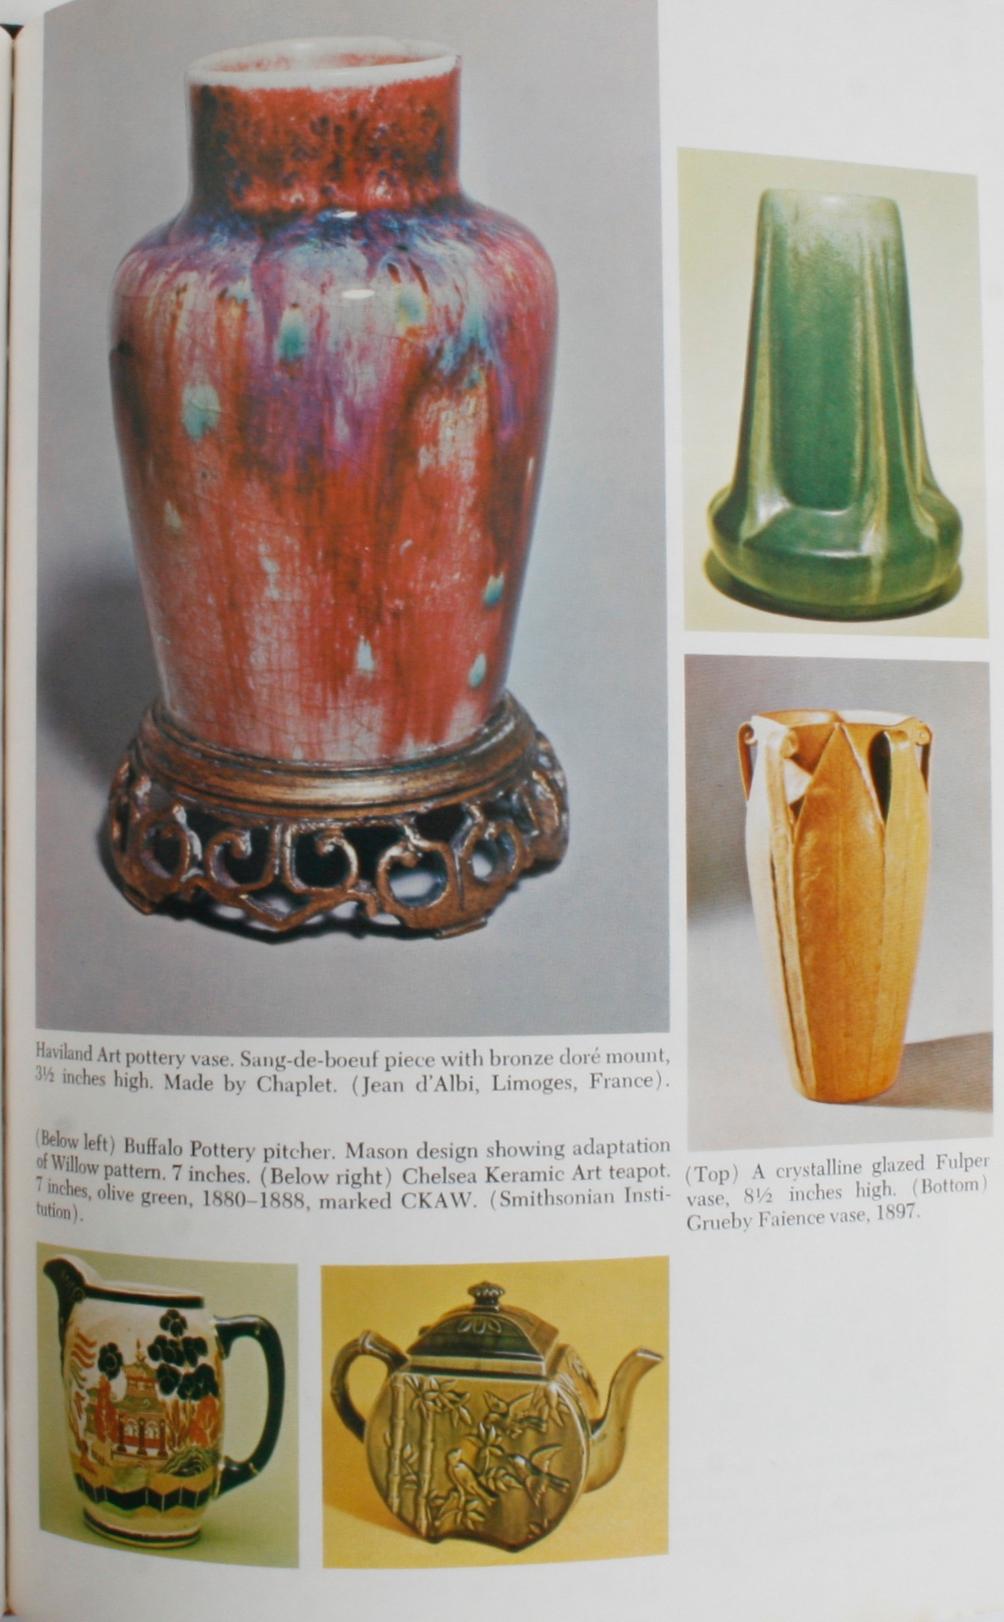 The Kovel's Collector's Guide to American Art Pottery by Ralph and Terry Kovel. New York: Crown Publishers, Inc., 1974. Hardcover with dust jacket. 369 pp. A detailed reference guide to American Art Pottery including craftsmen, signatures and marks,